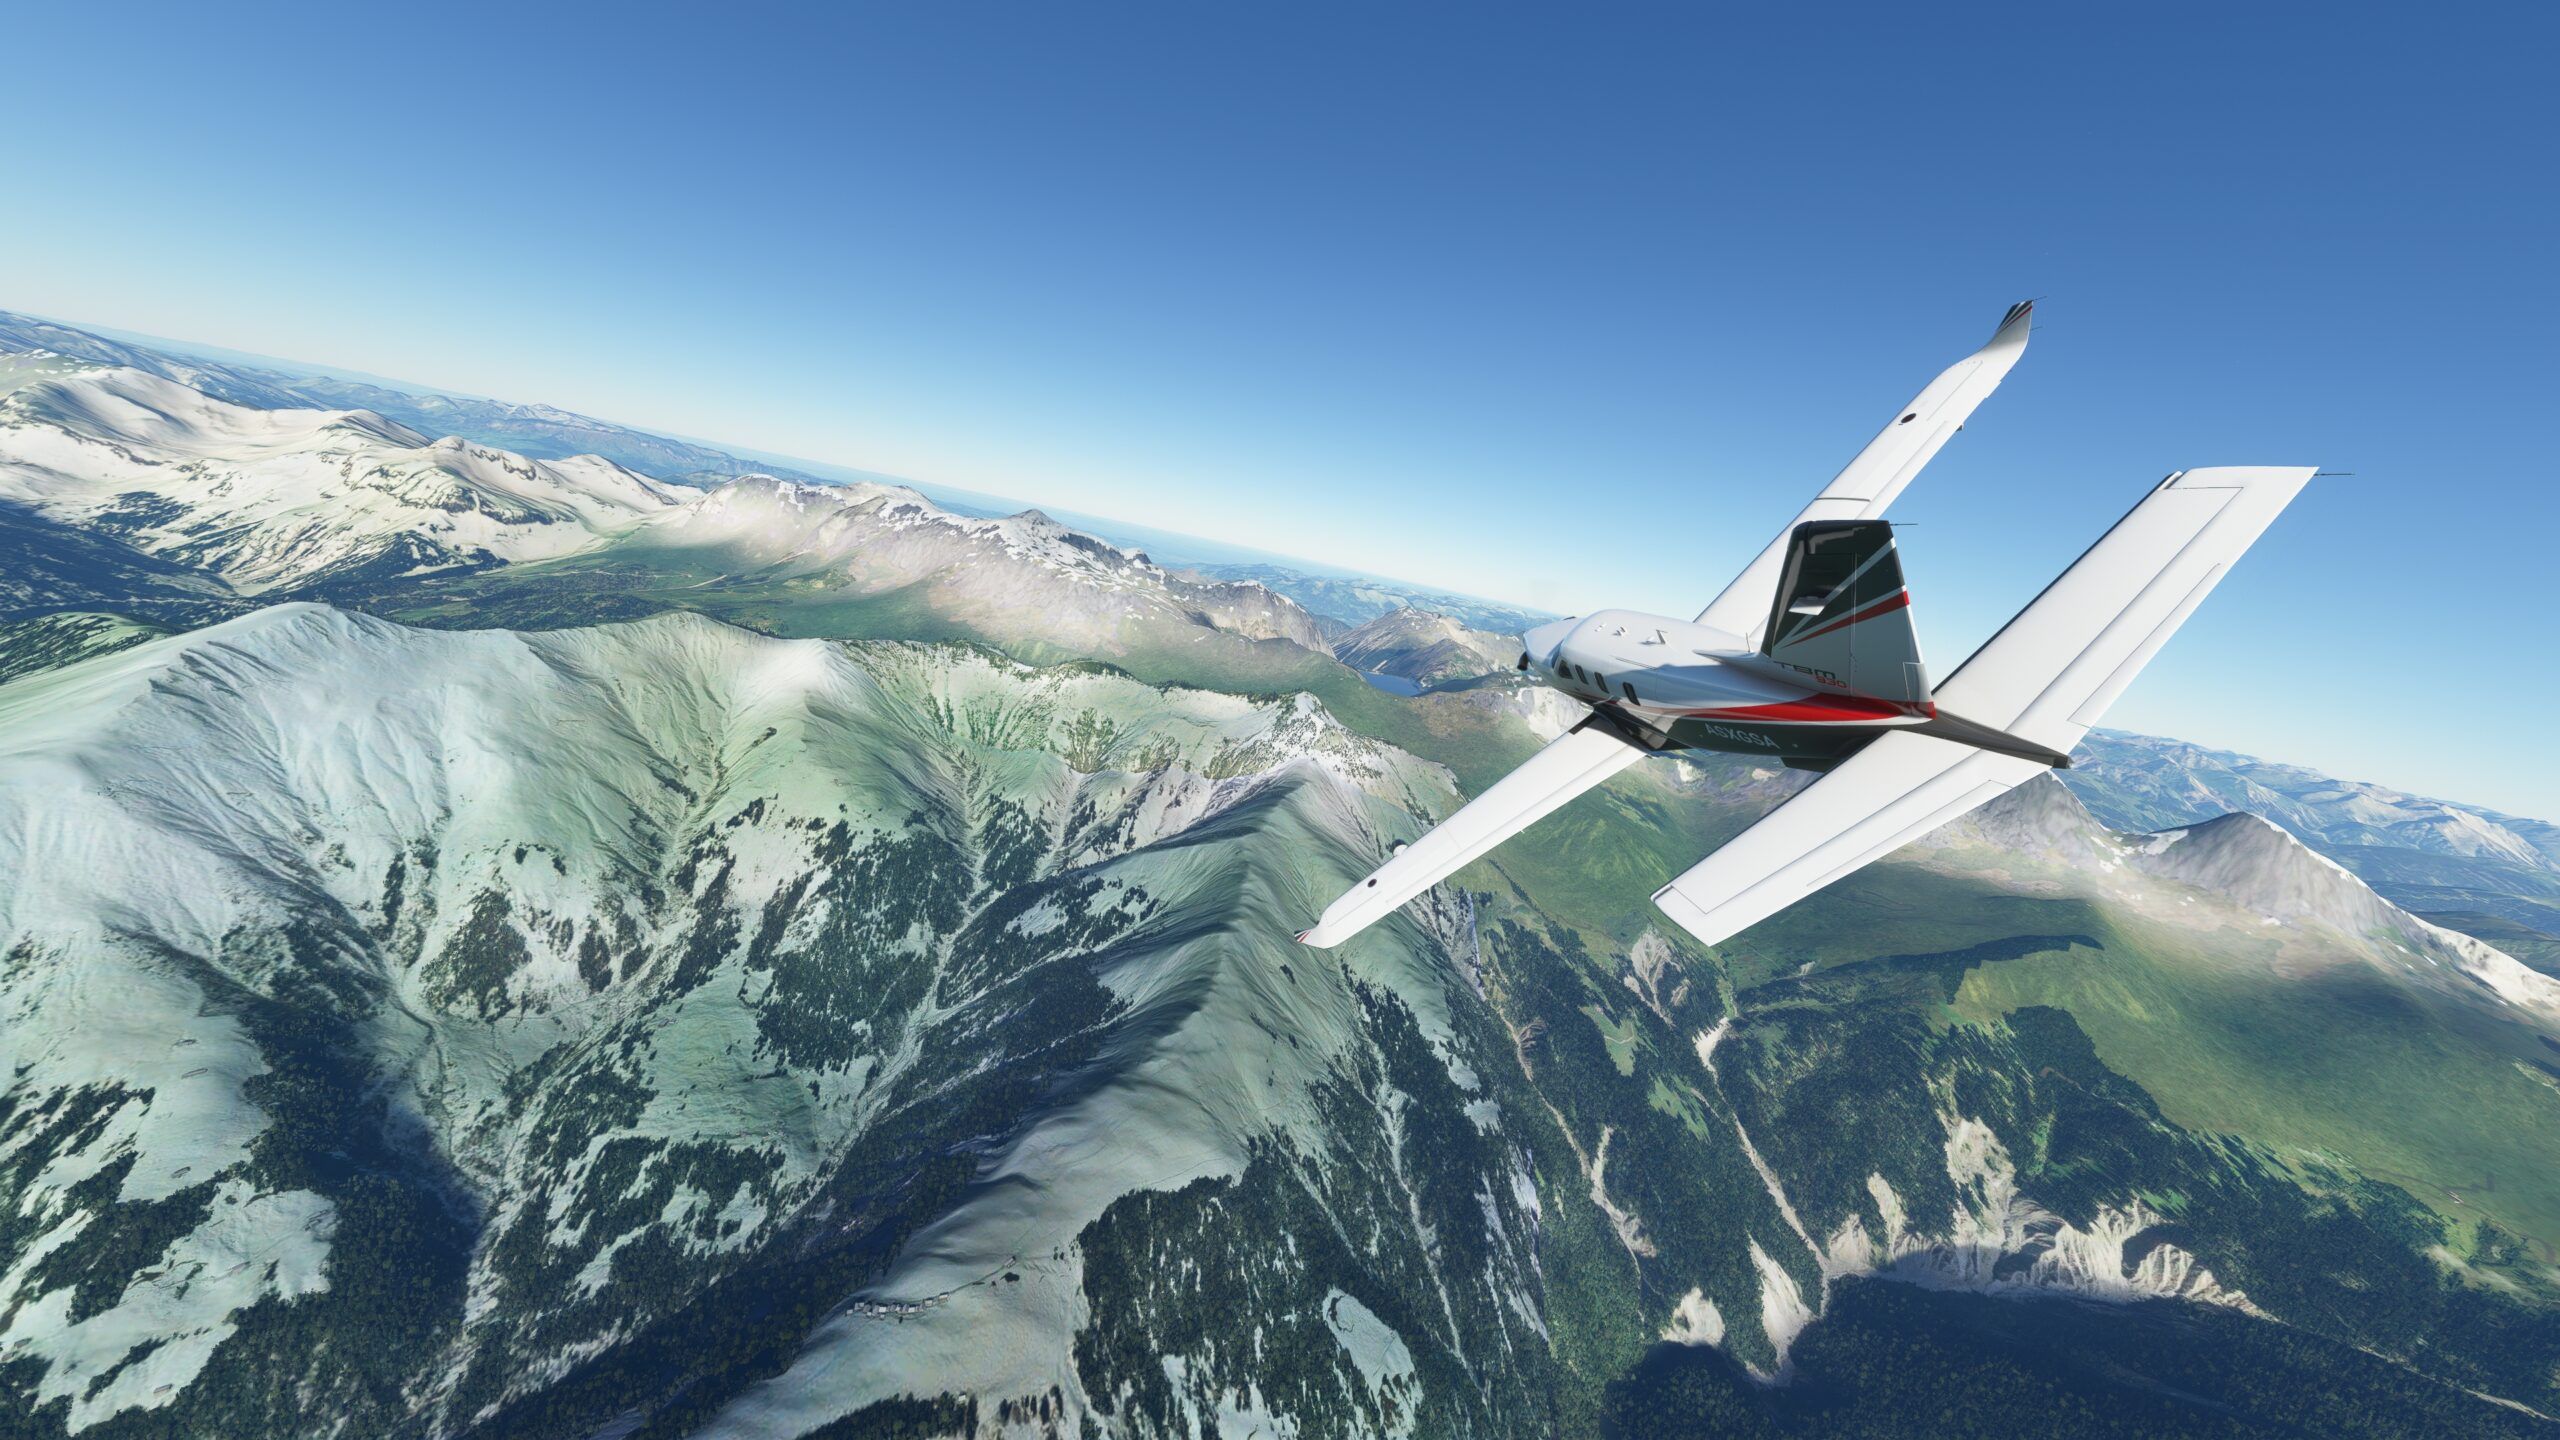 Microsoft Flight Simulator plane flying over snow-tipped mountains